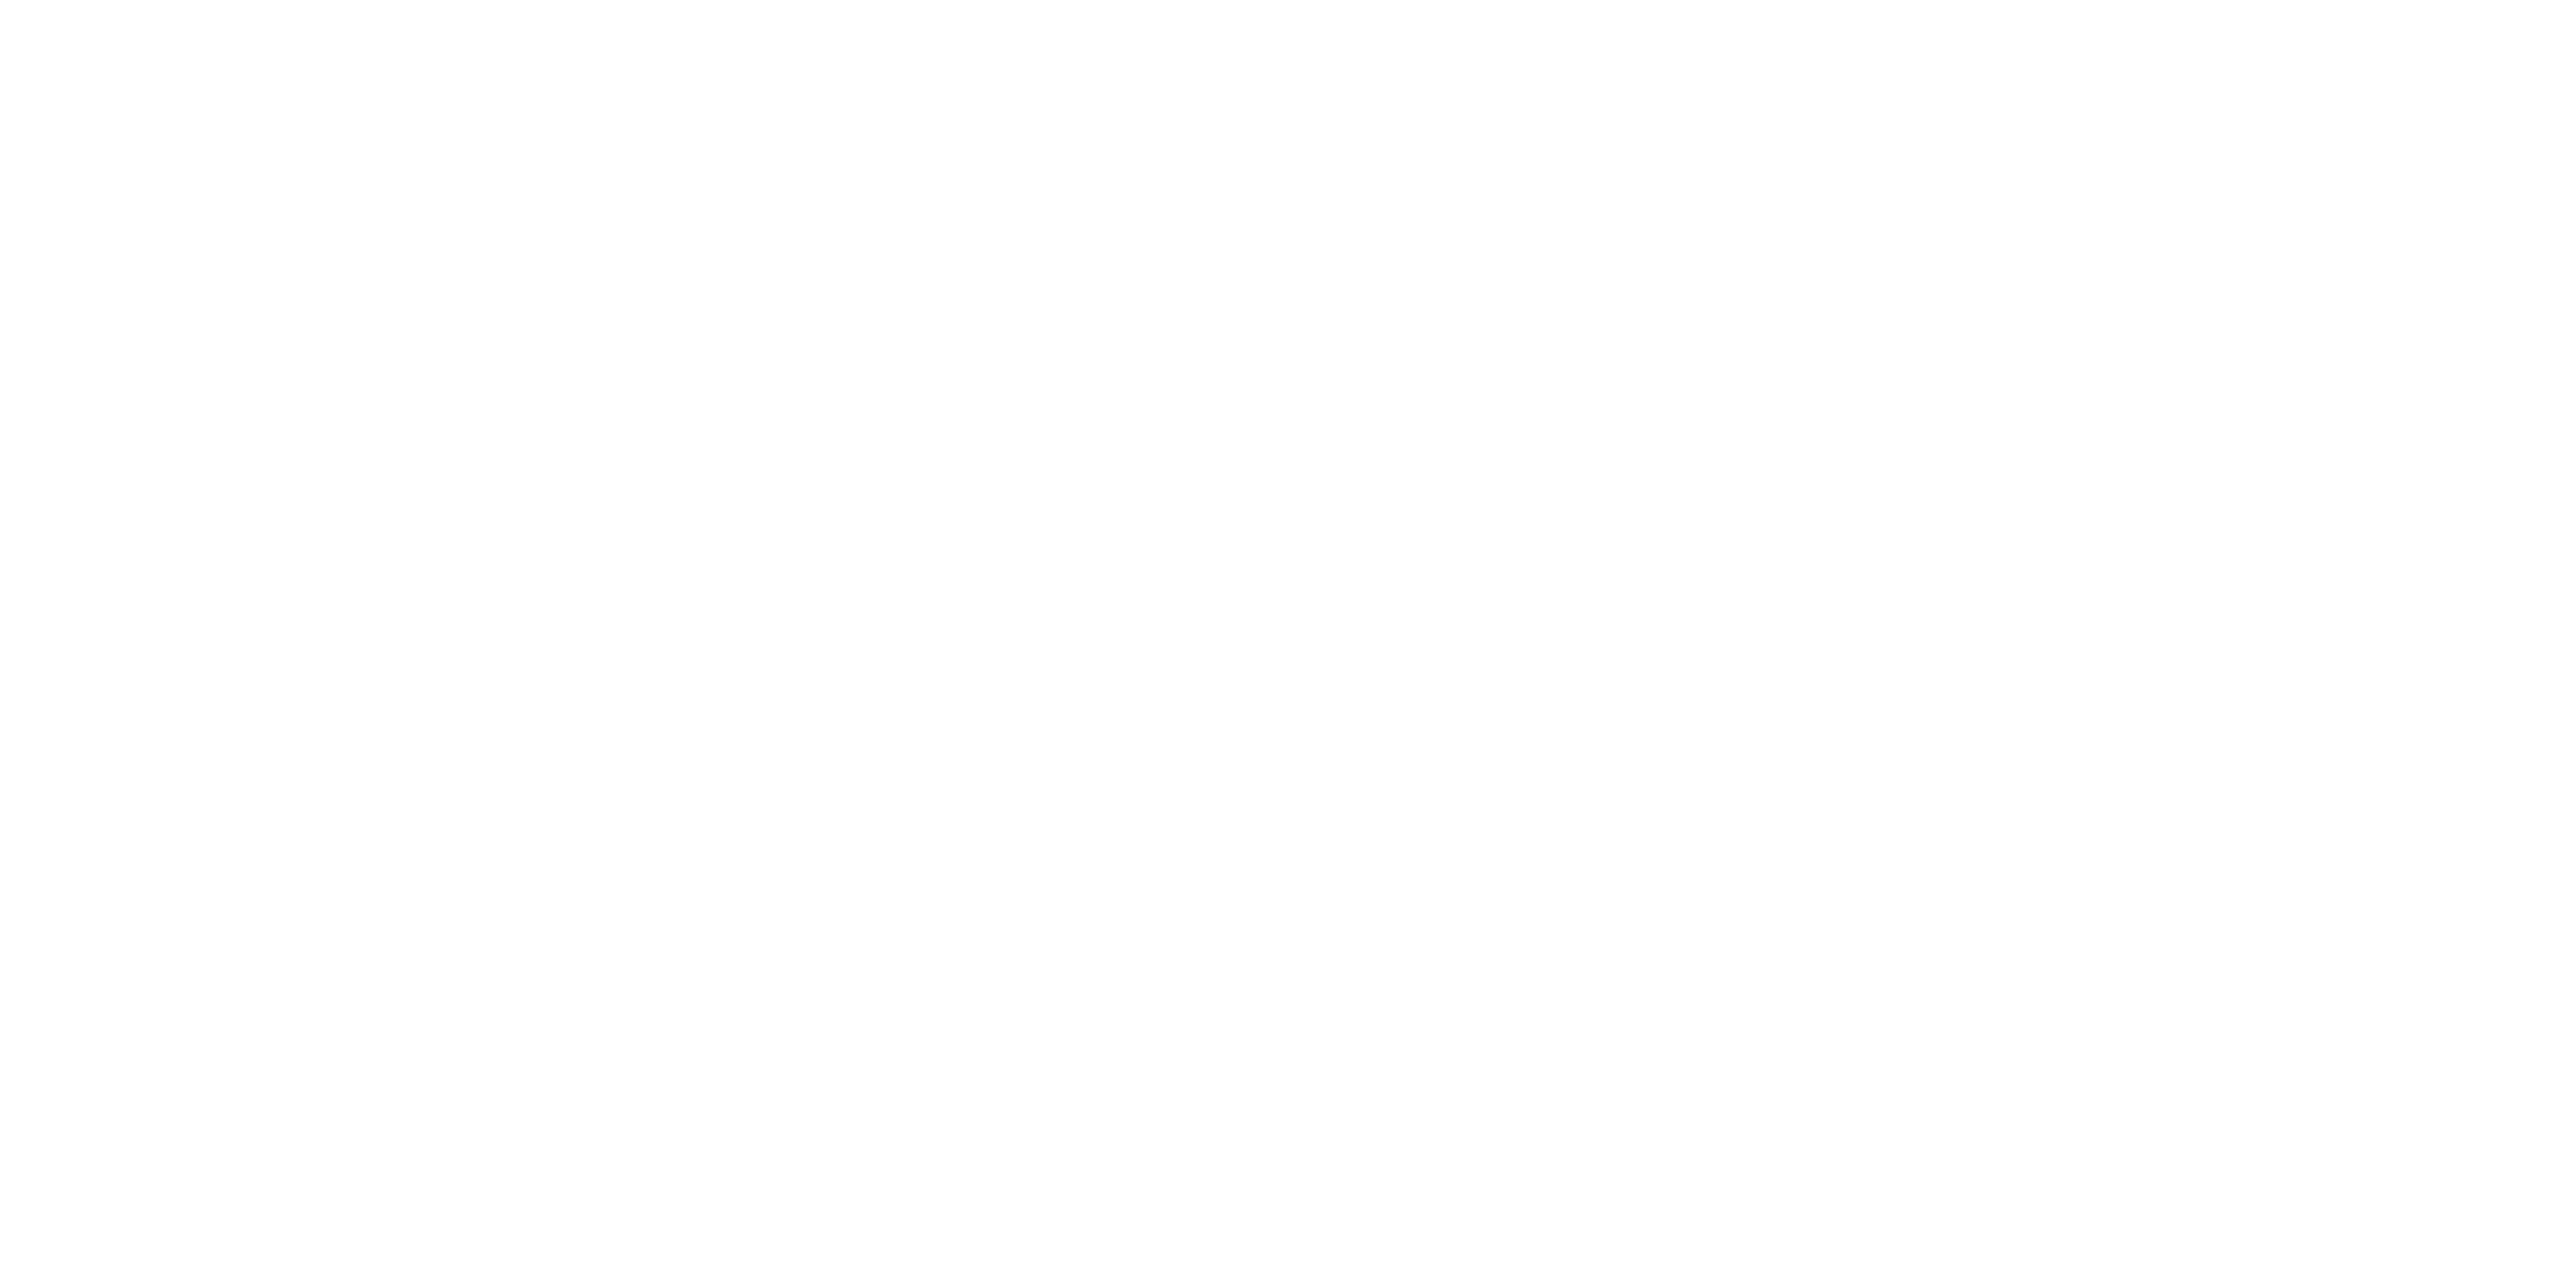 HERITAGE SOUNDS